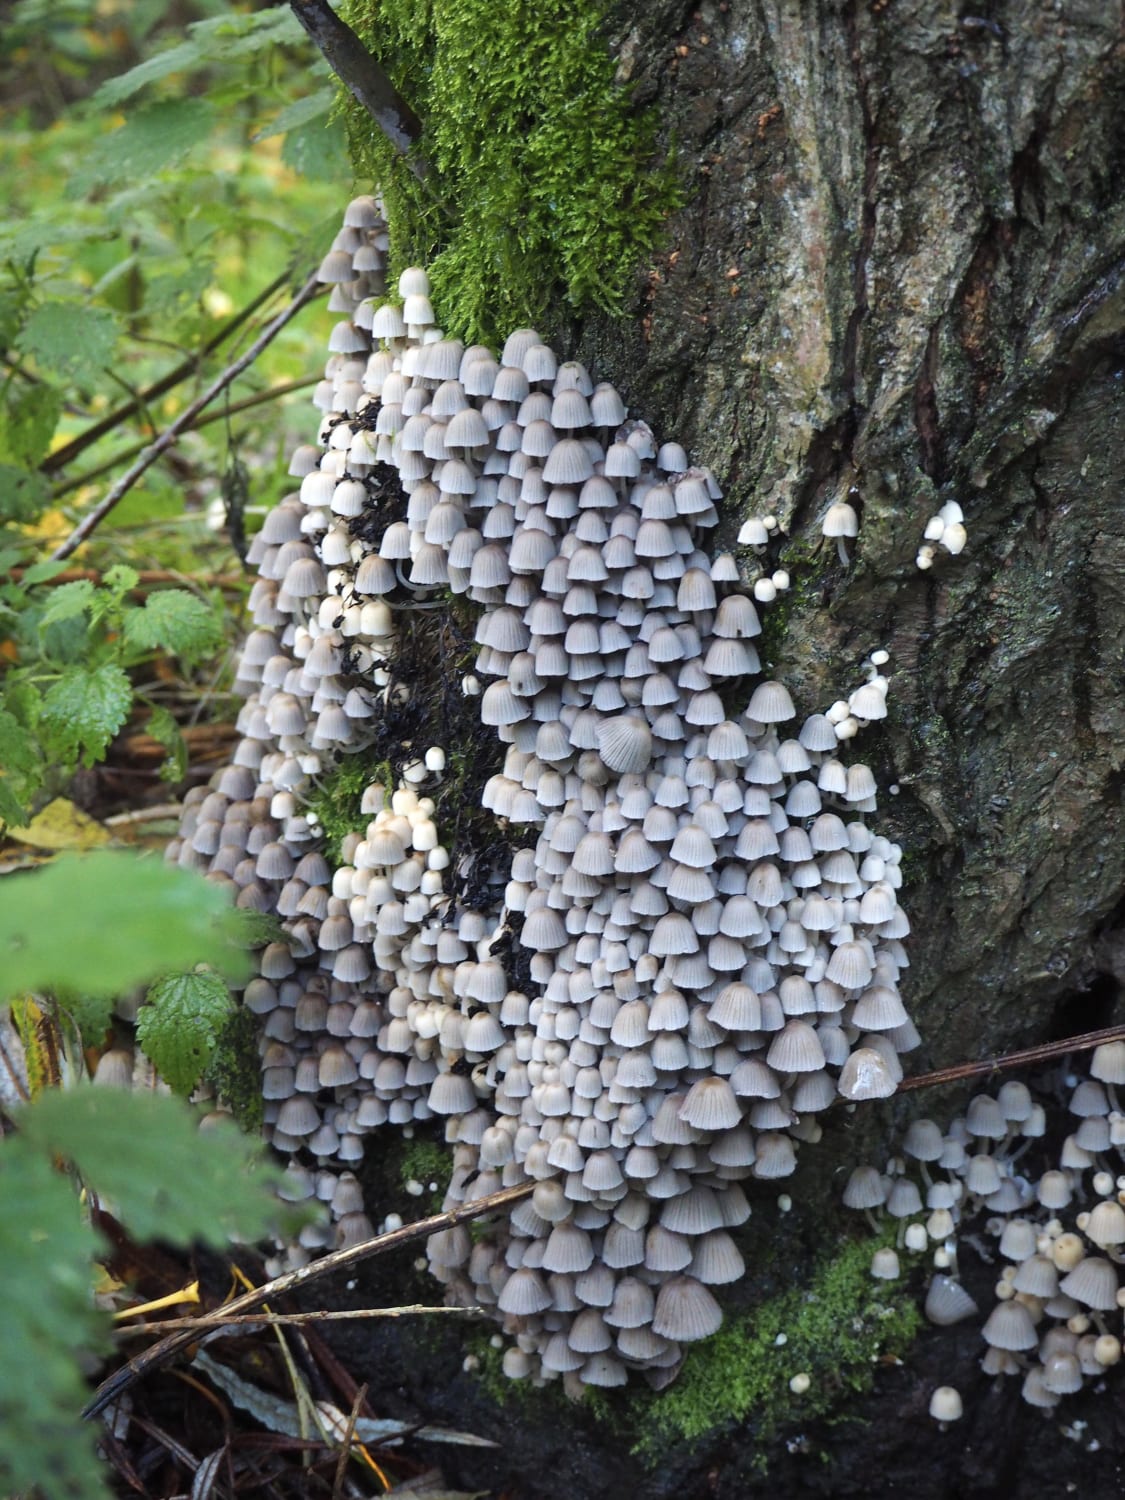 A little village of Fairy inkcaps! Found this weekend in London